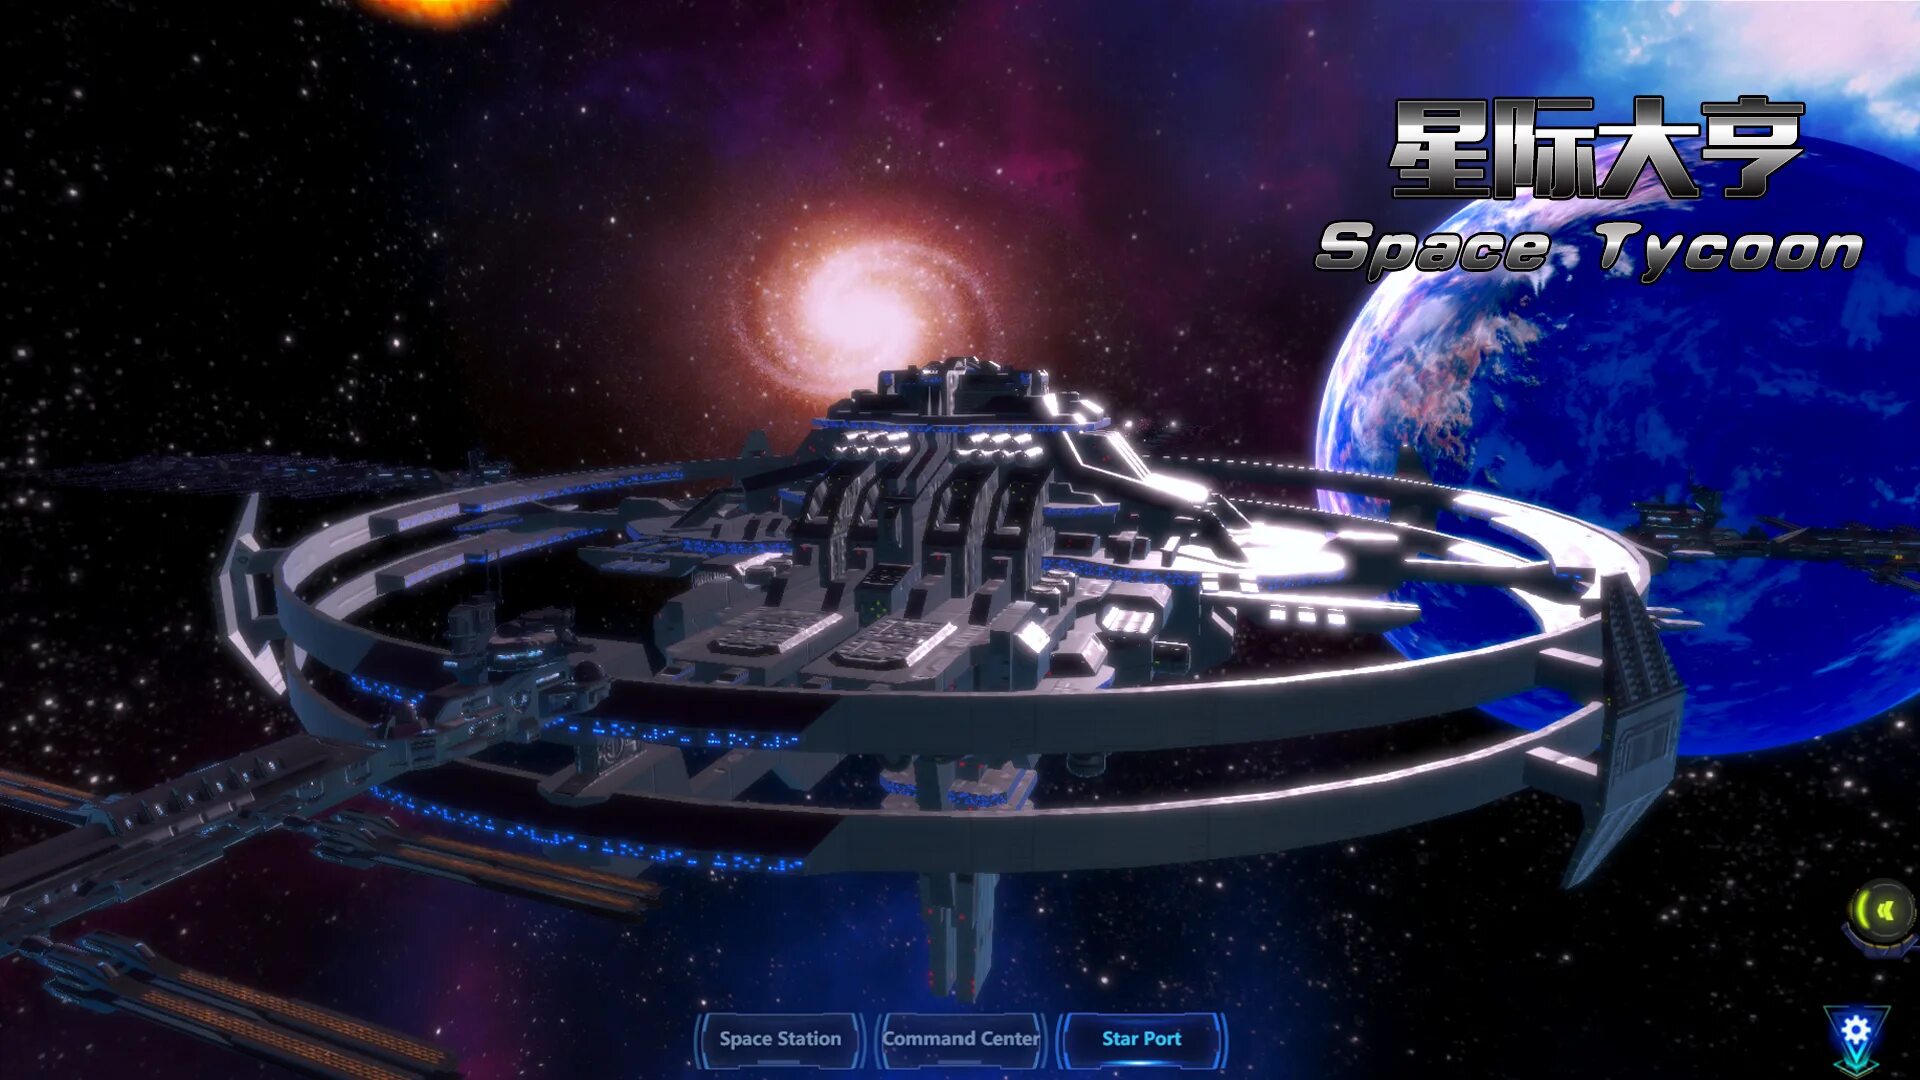 Outer space game. Space Station Tycoon. Мод на космос. Outer Space игра. Space Station Tycoon 2000.